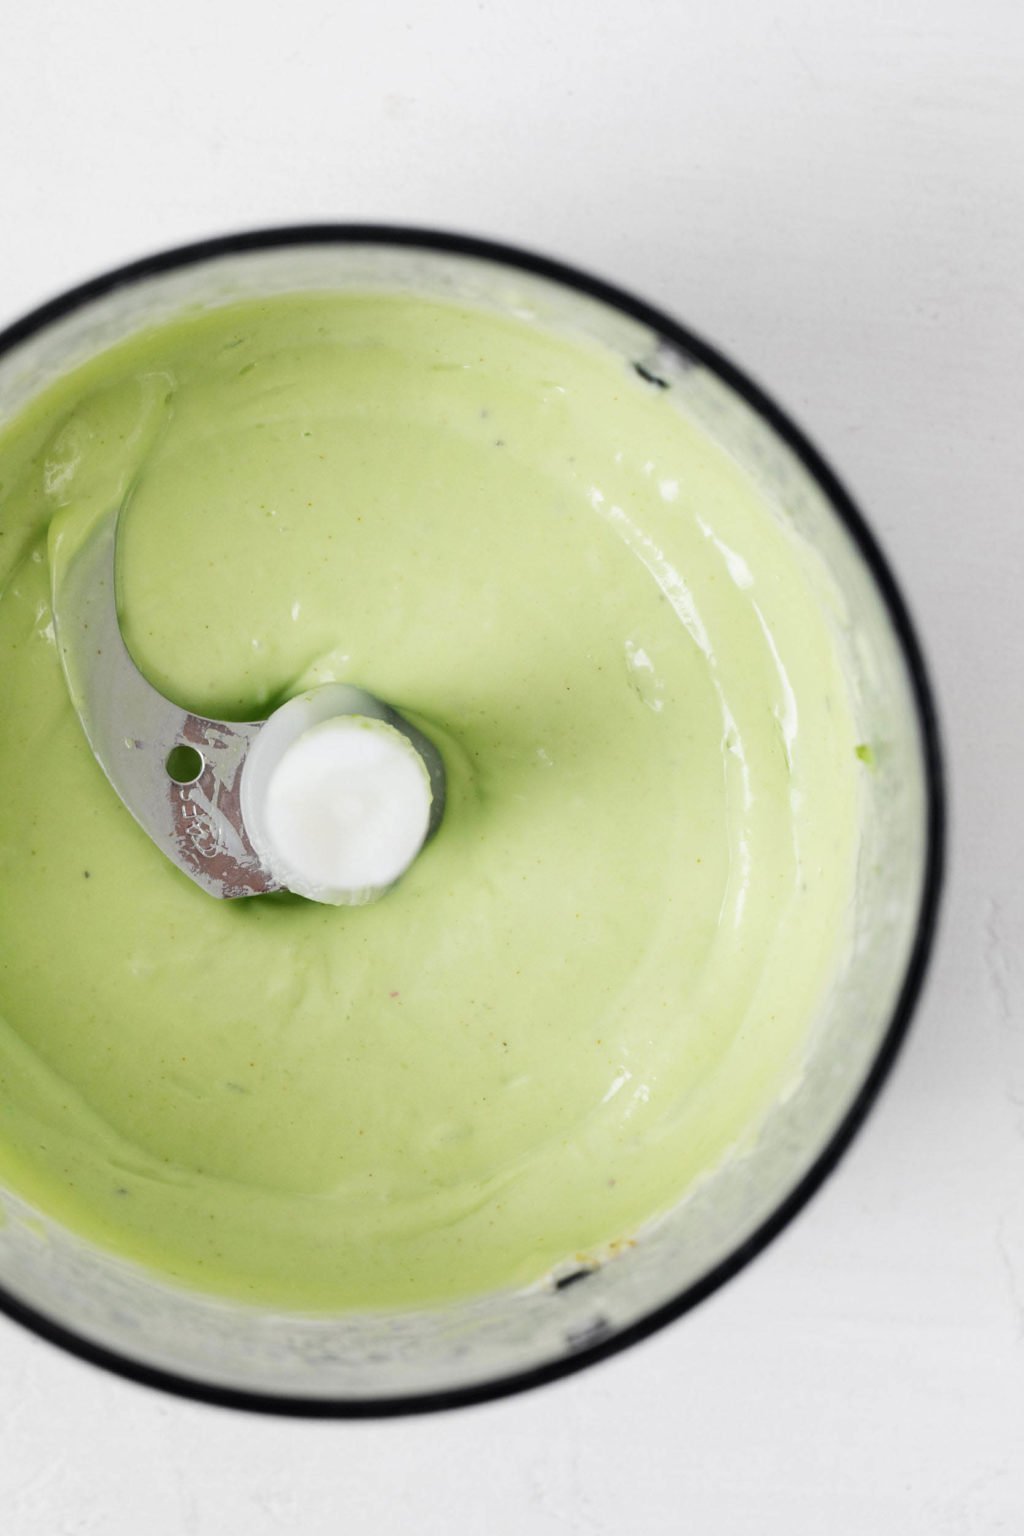 A light green sauce is being blended in a food processor.